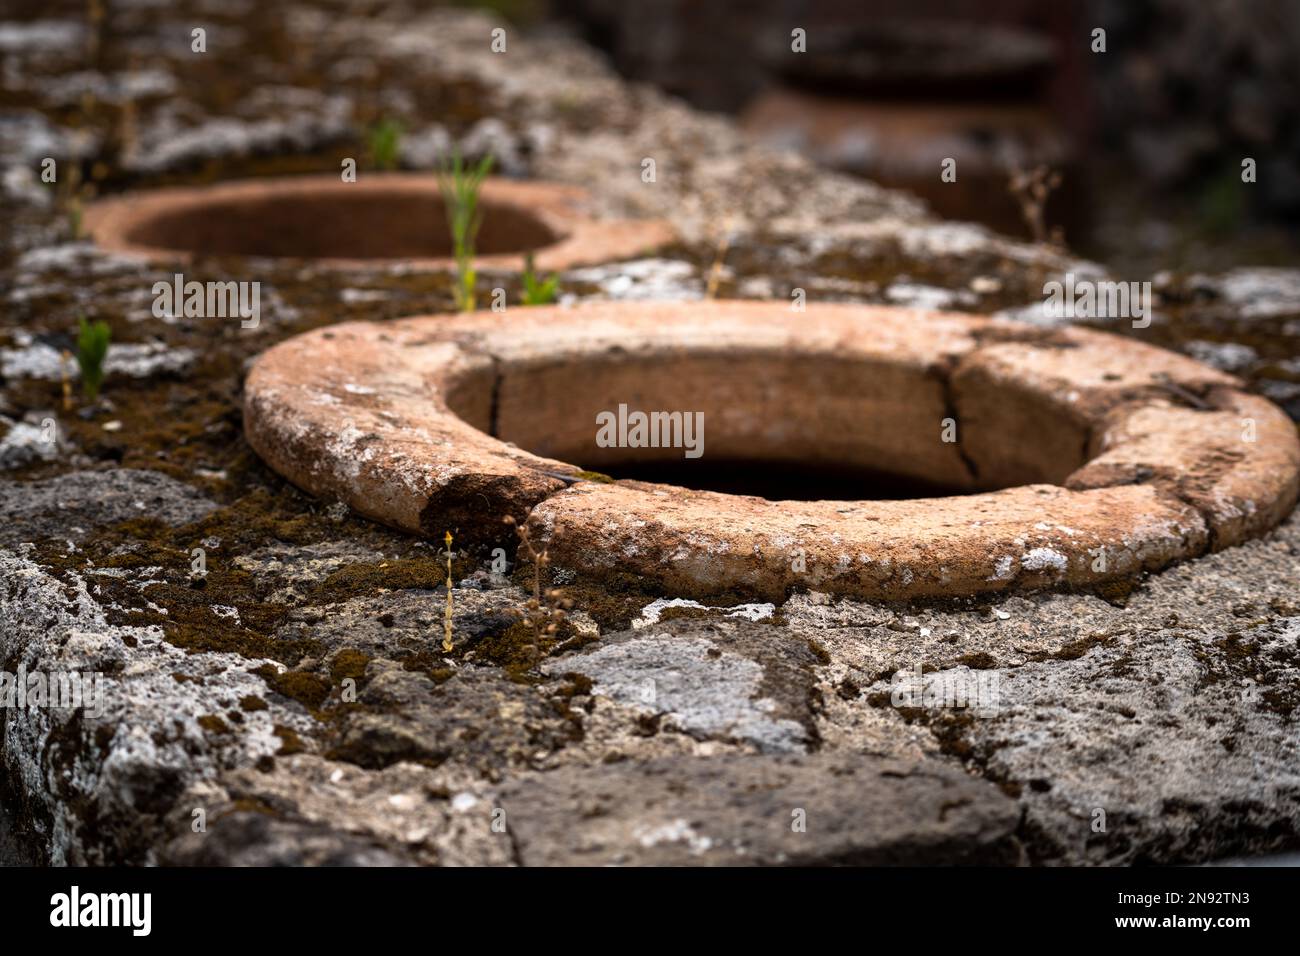 Closeup of ancient roman kitchen in the ruins of Pompeii, Italy Stock Photo